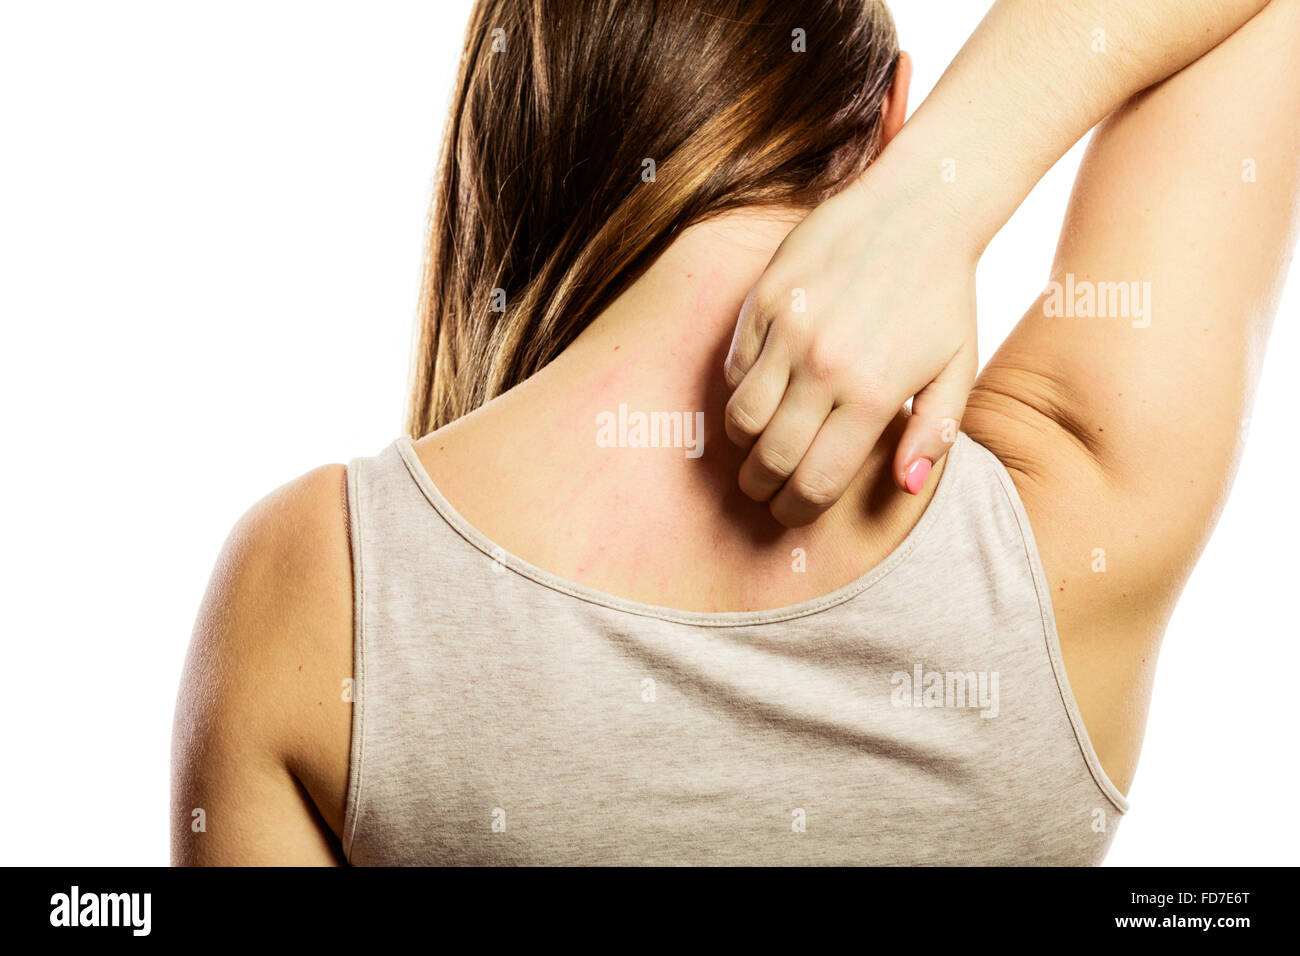 Health problem. Young woman scratching her itchy back with allergy